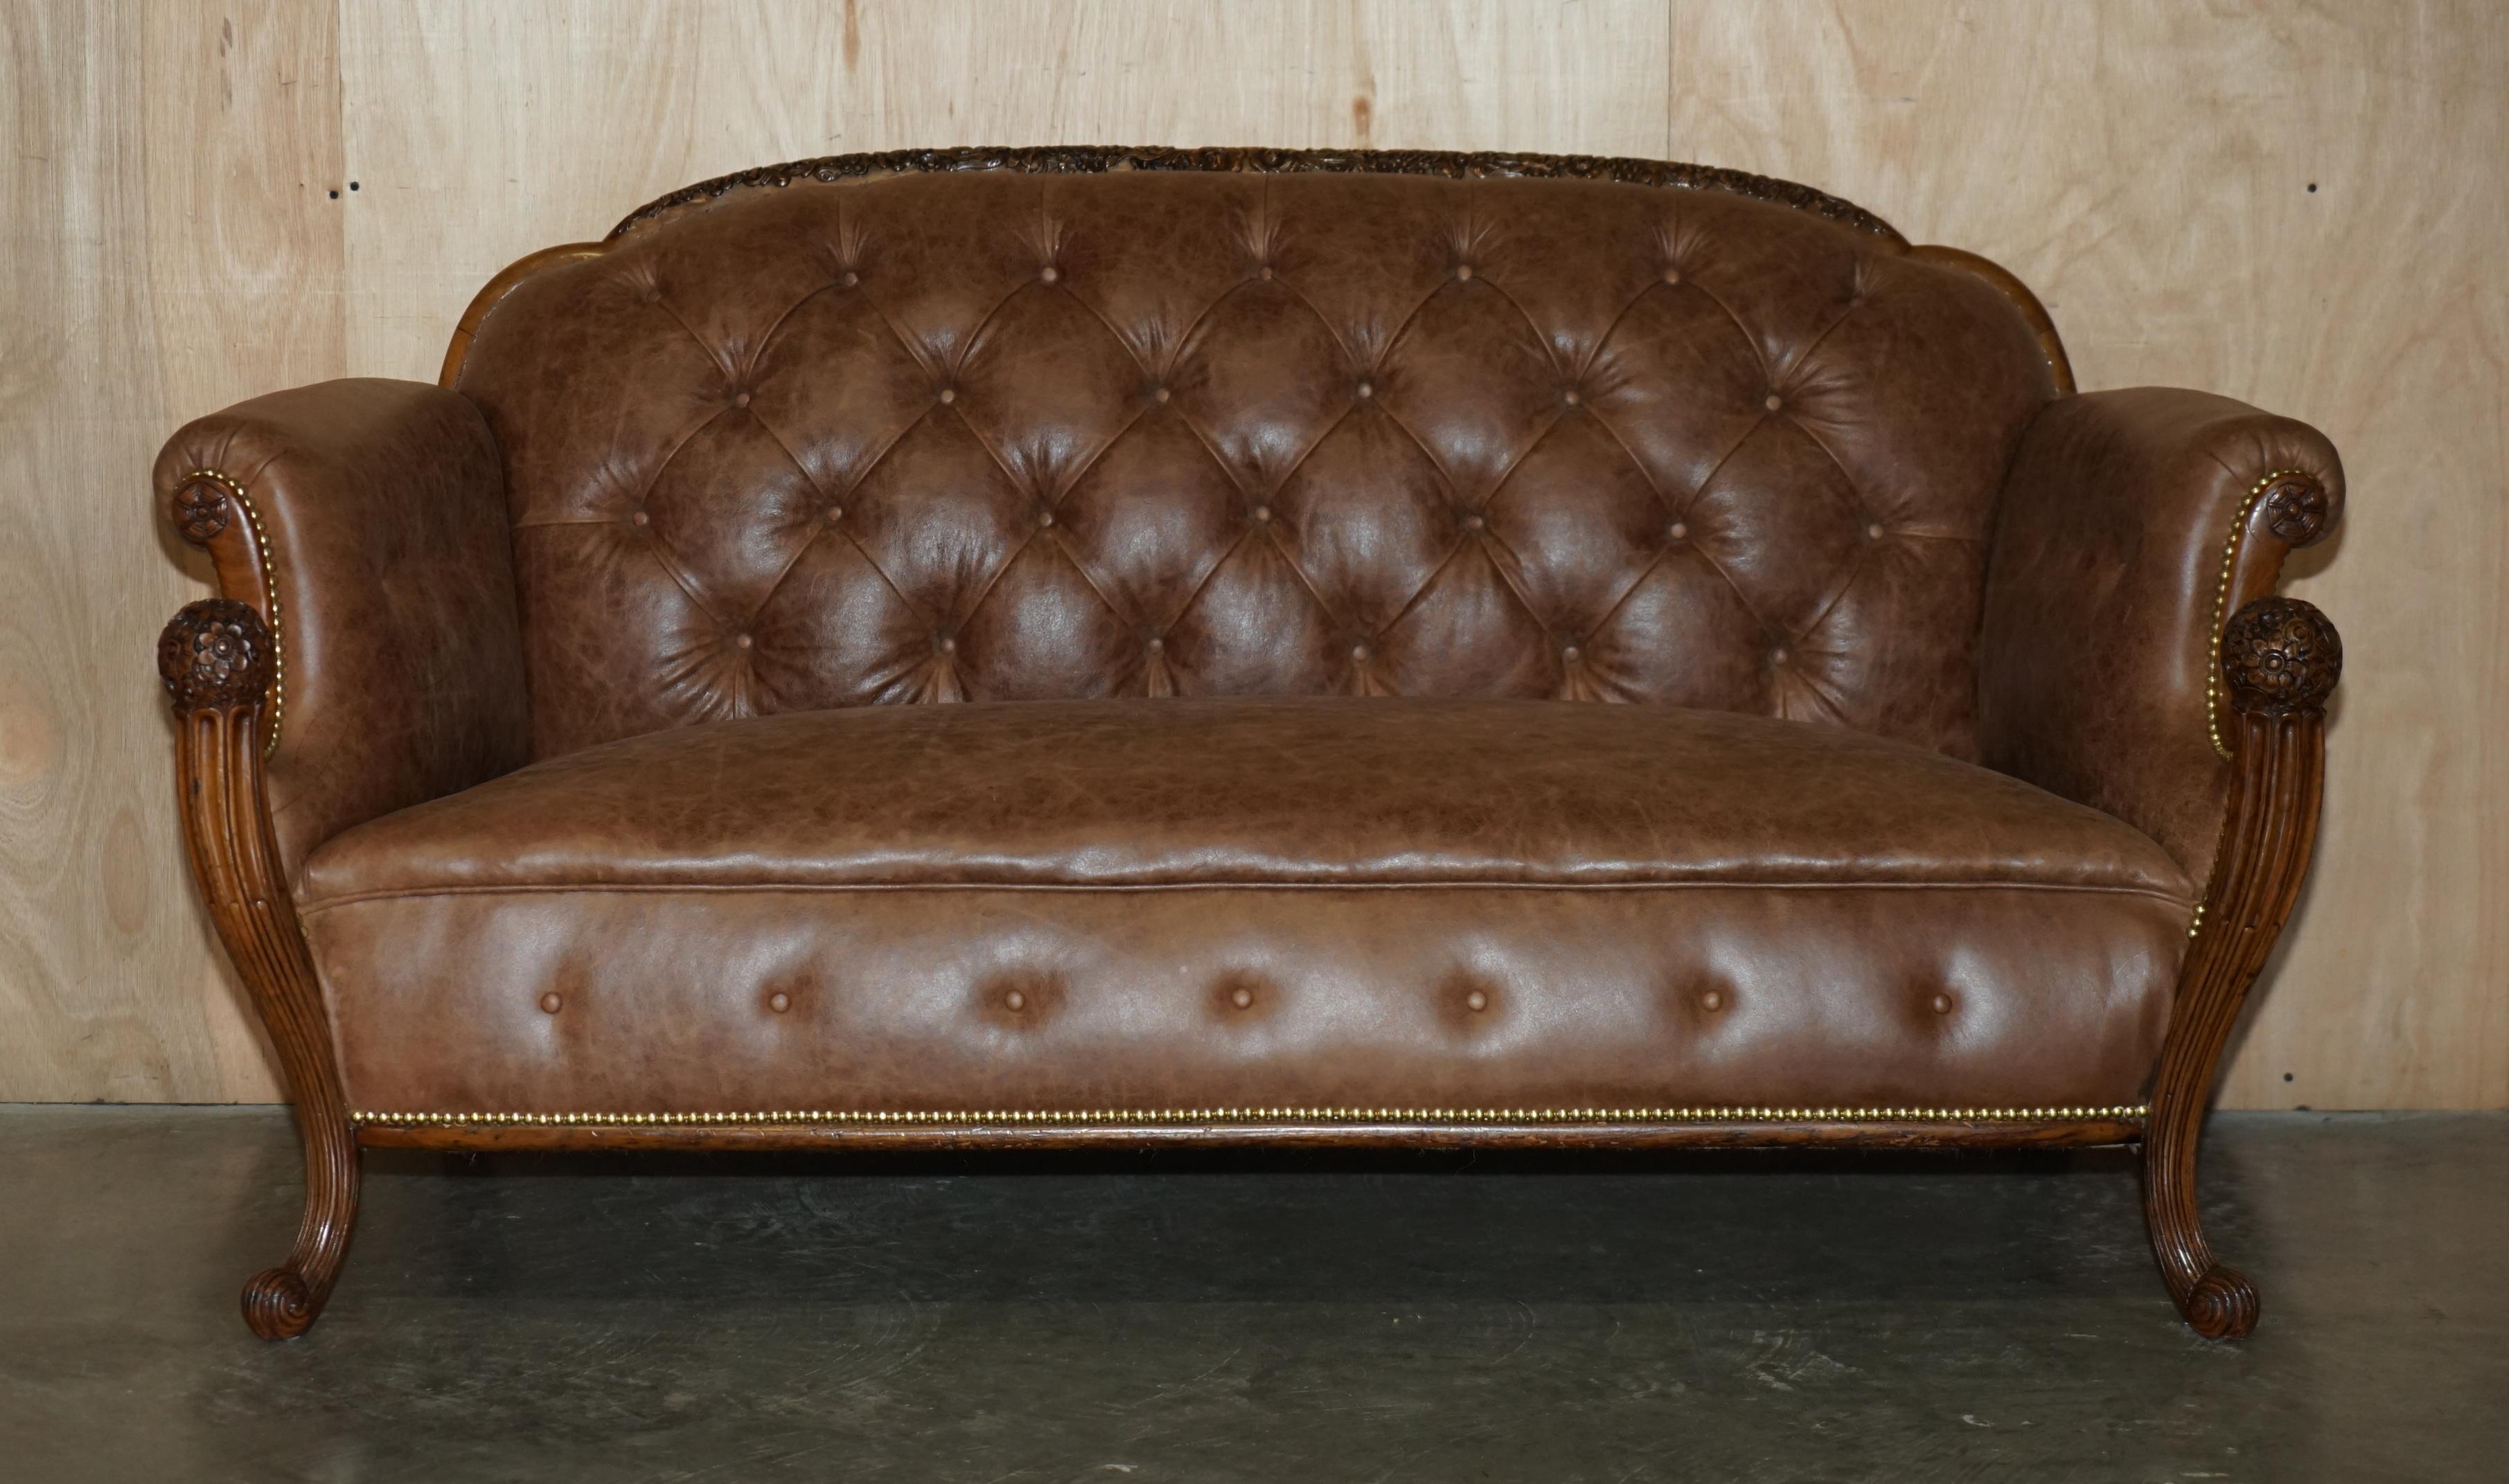 Royal House Antiques

Royal House Antiques is delighted to offer for sale this very rare, fully restored Regency circa 1810 brown leather Chesterfield tufted sofa with hand carved Walnut frame

Please note the delivery fee listed is just a guide, it